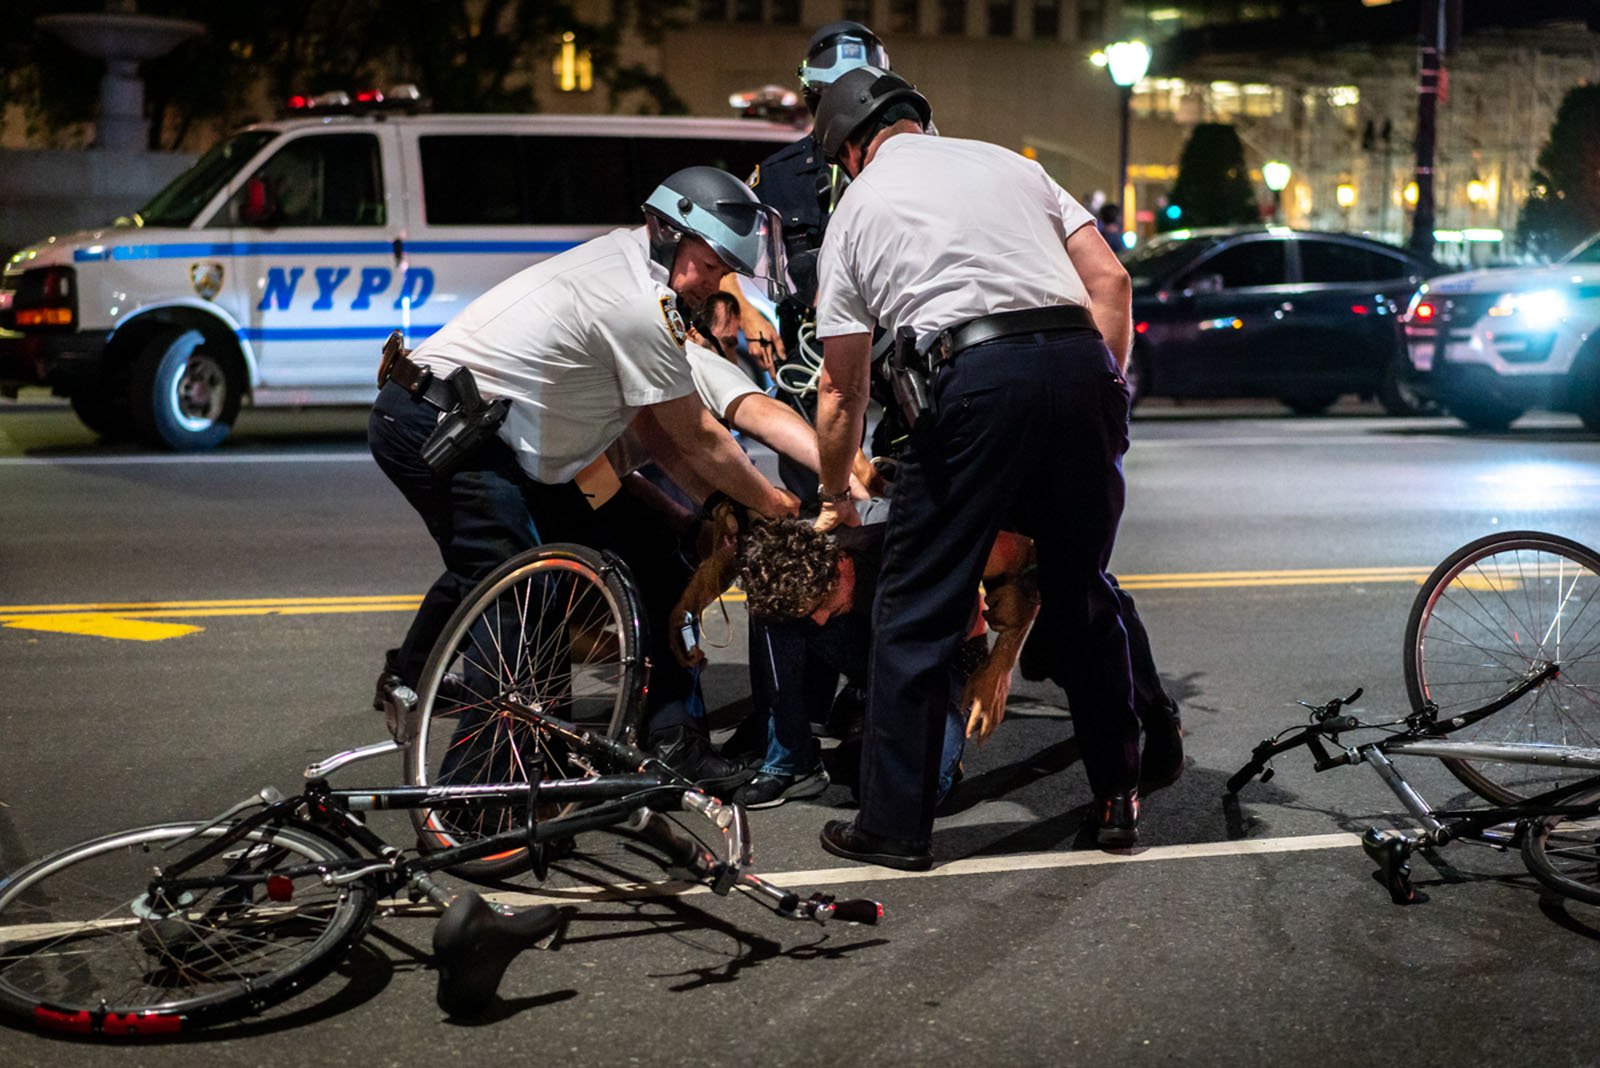 A group of police officers appear to be holding a man who is on the ground, while two bikes are seen left on the ground.